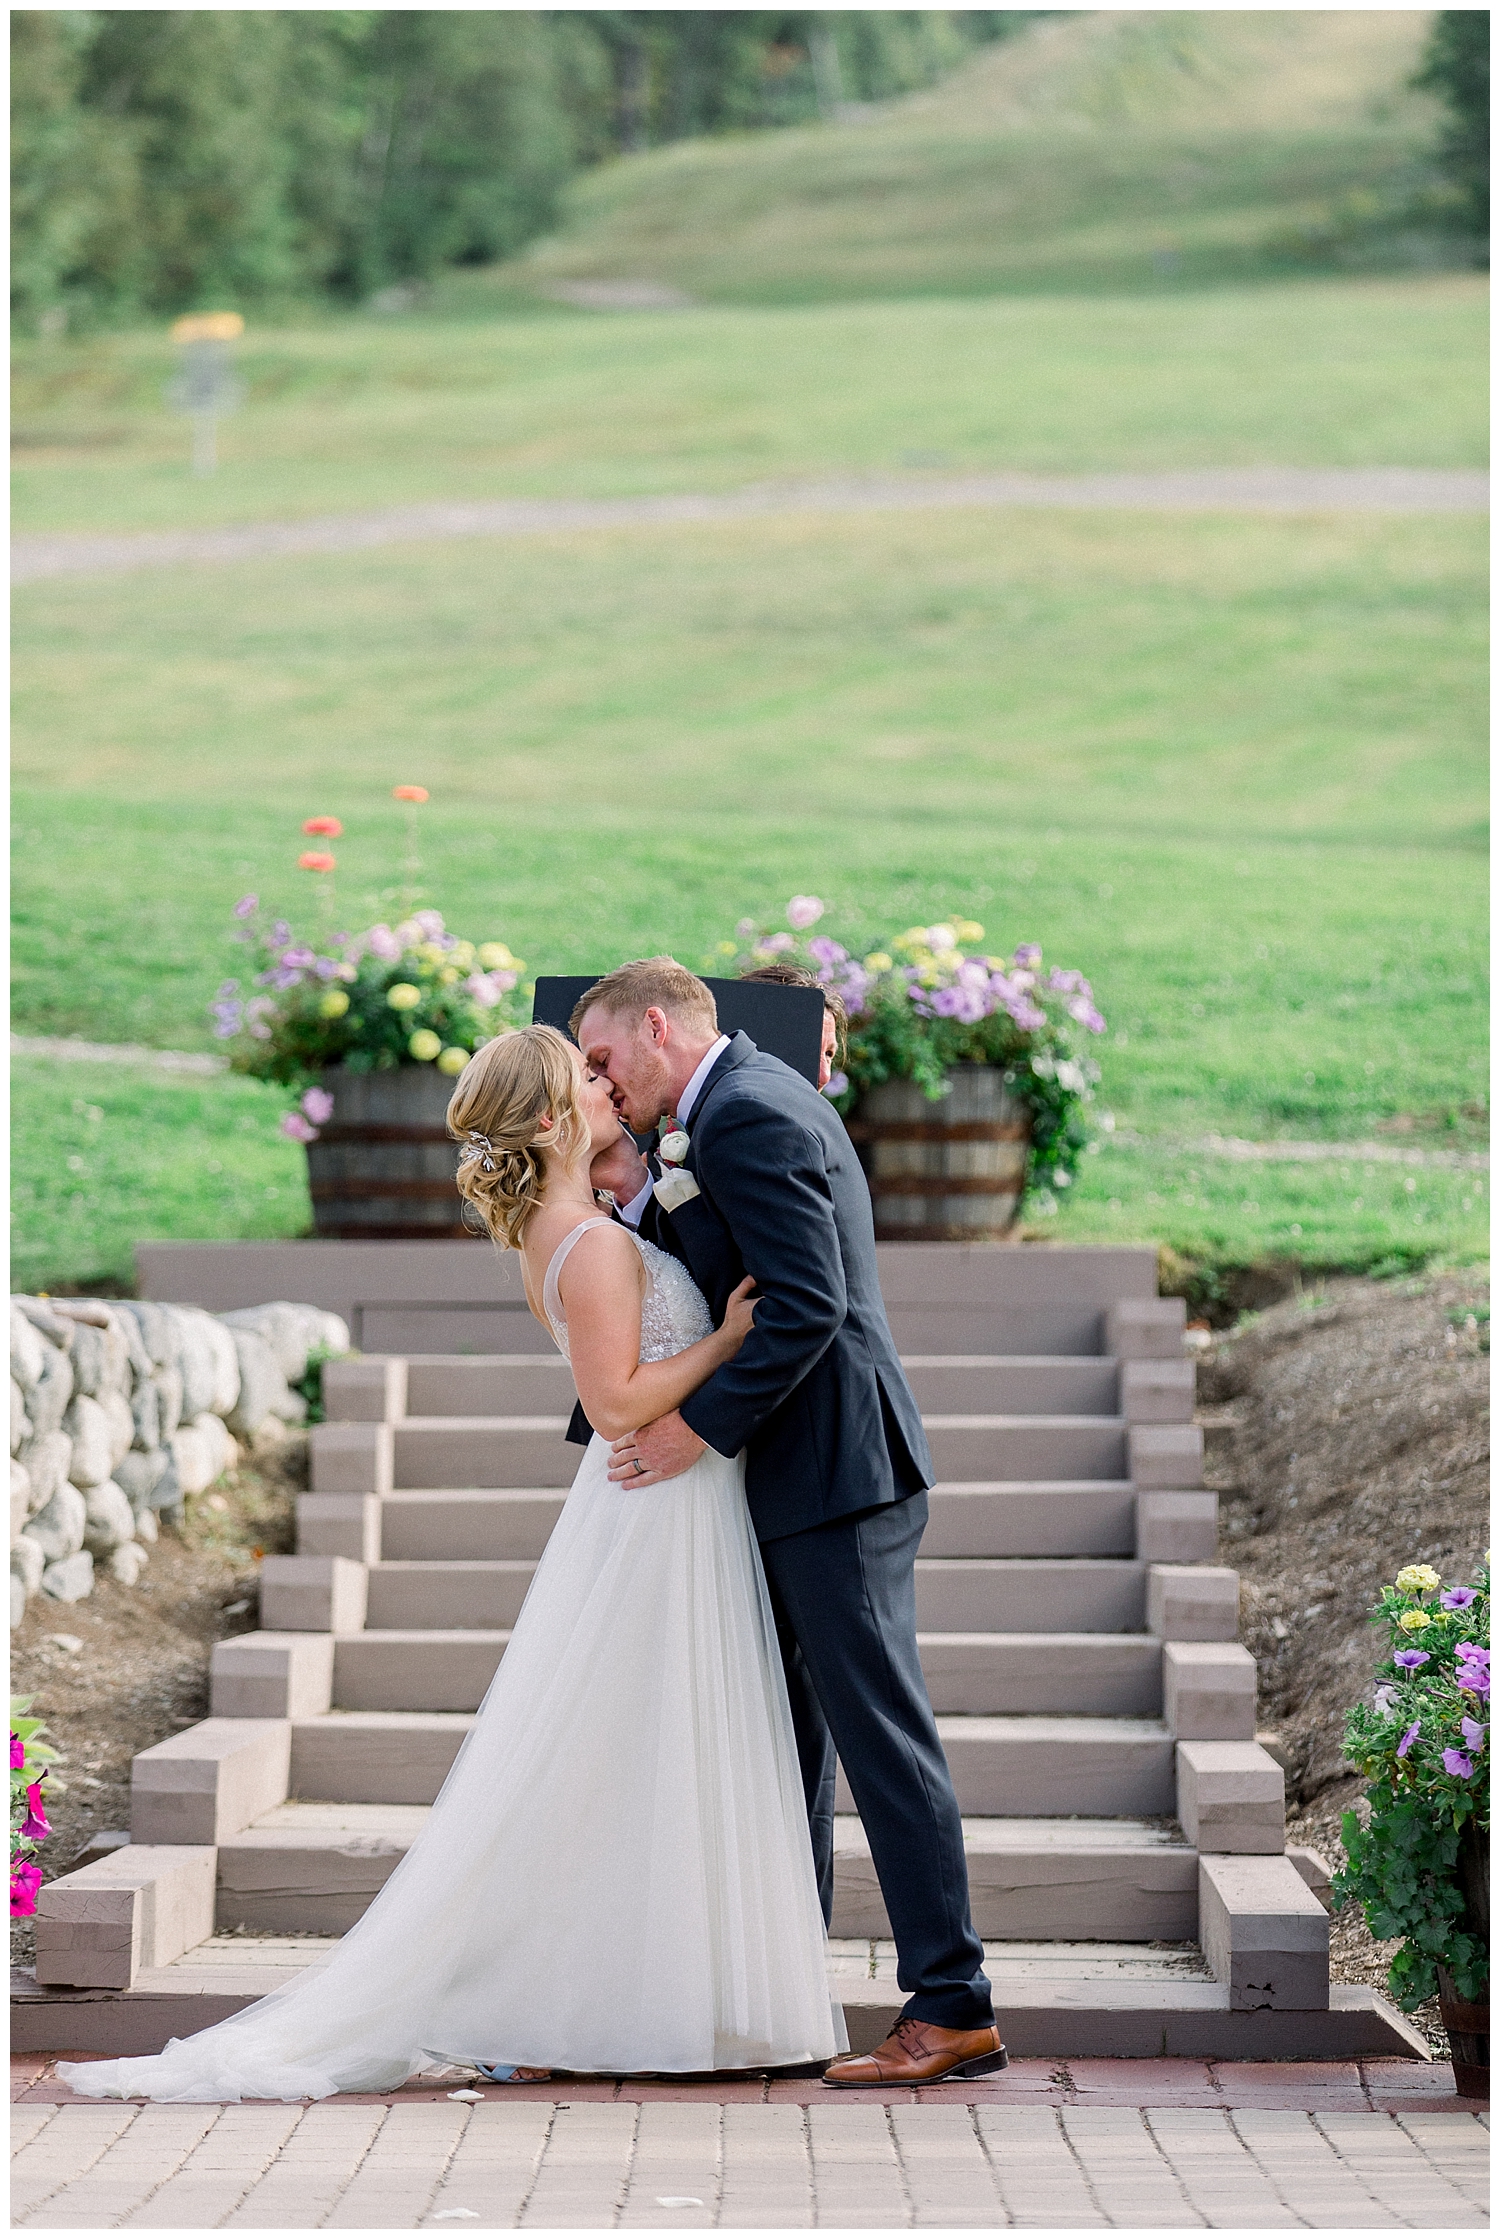 First kiss at outside wedding ceremony at Sugarloaf Mountain Resort in Maine, photos by Halie Olszowy.